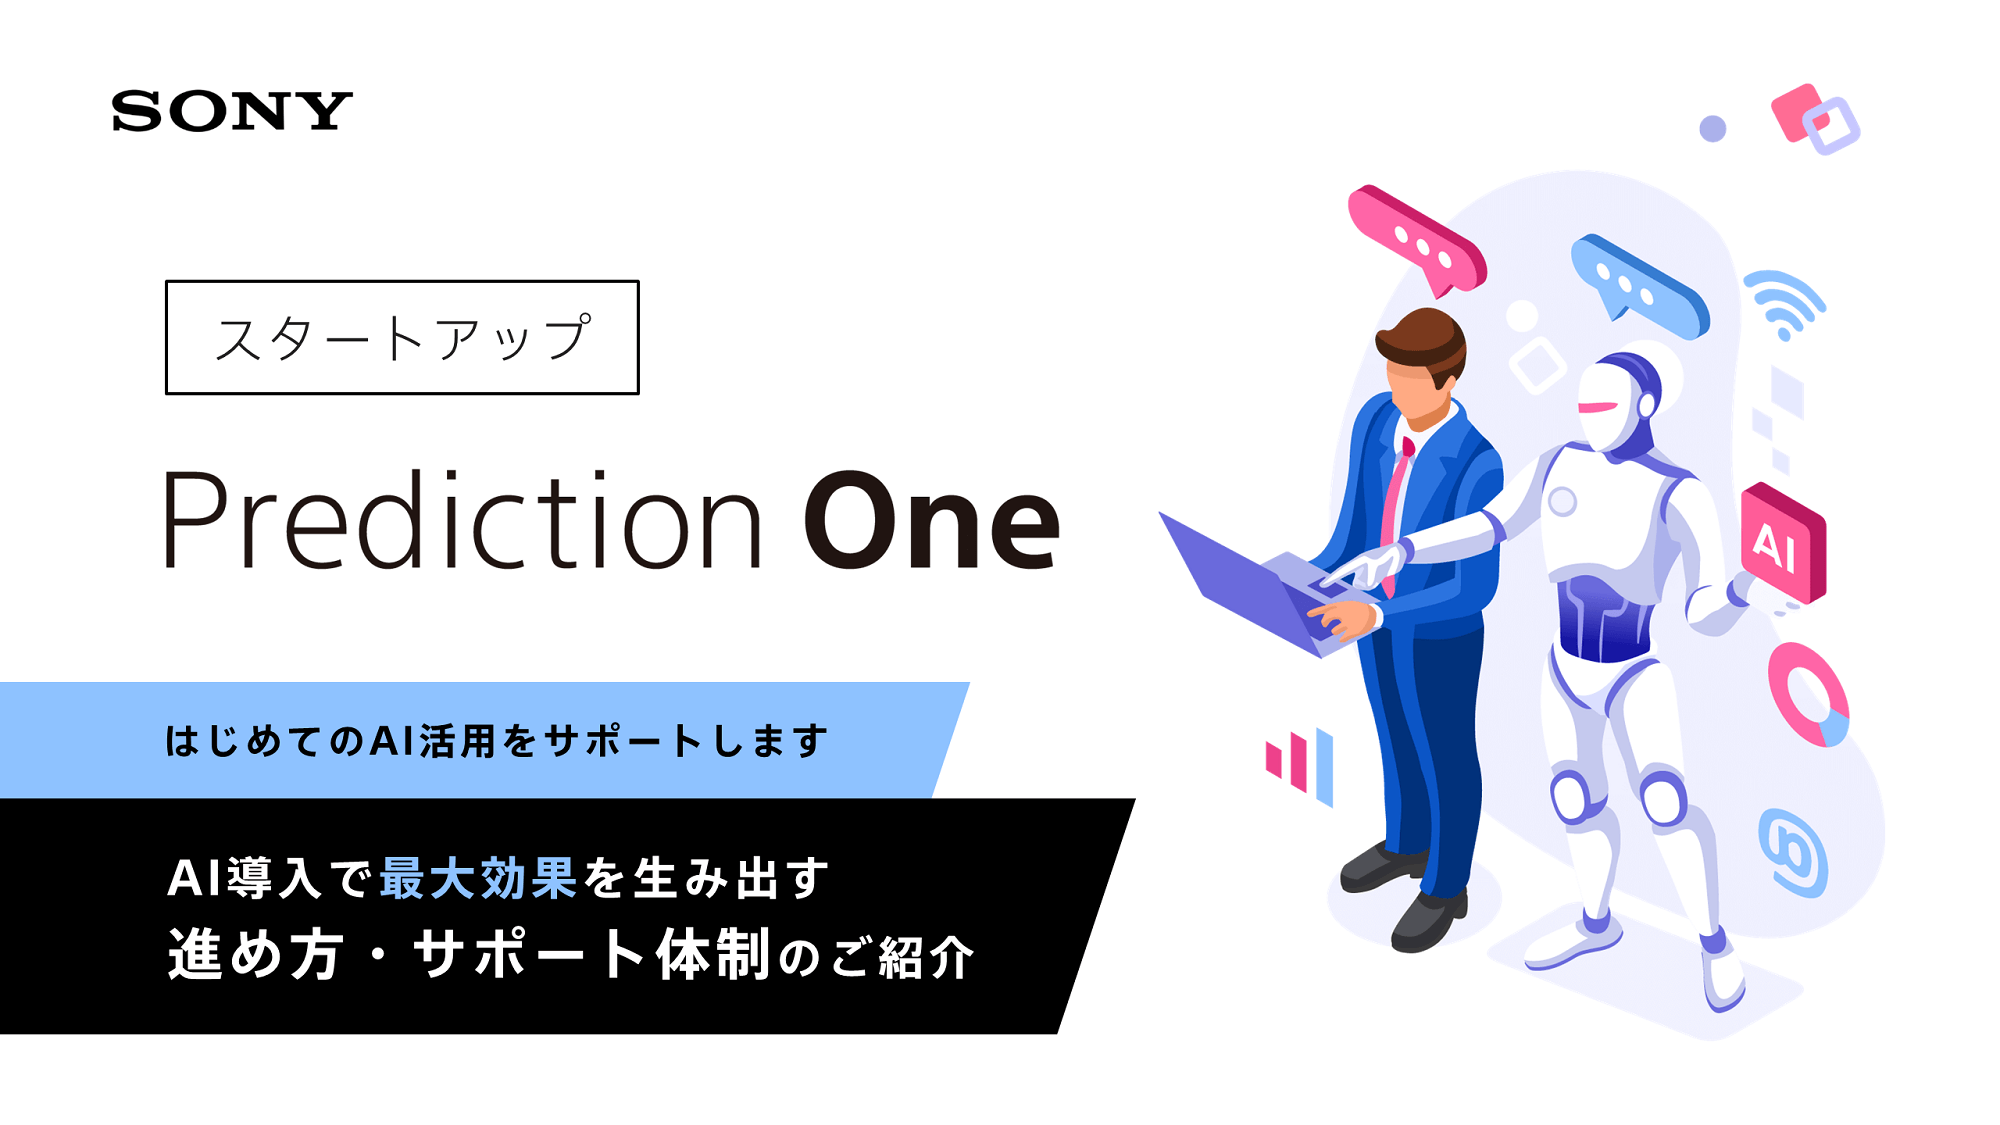 「Prediction One」スタートアップ資料